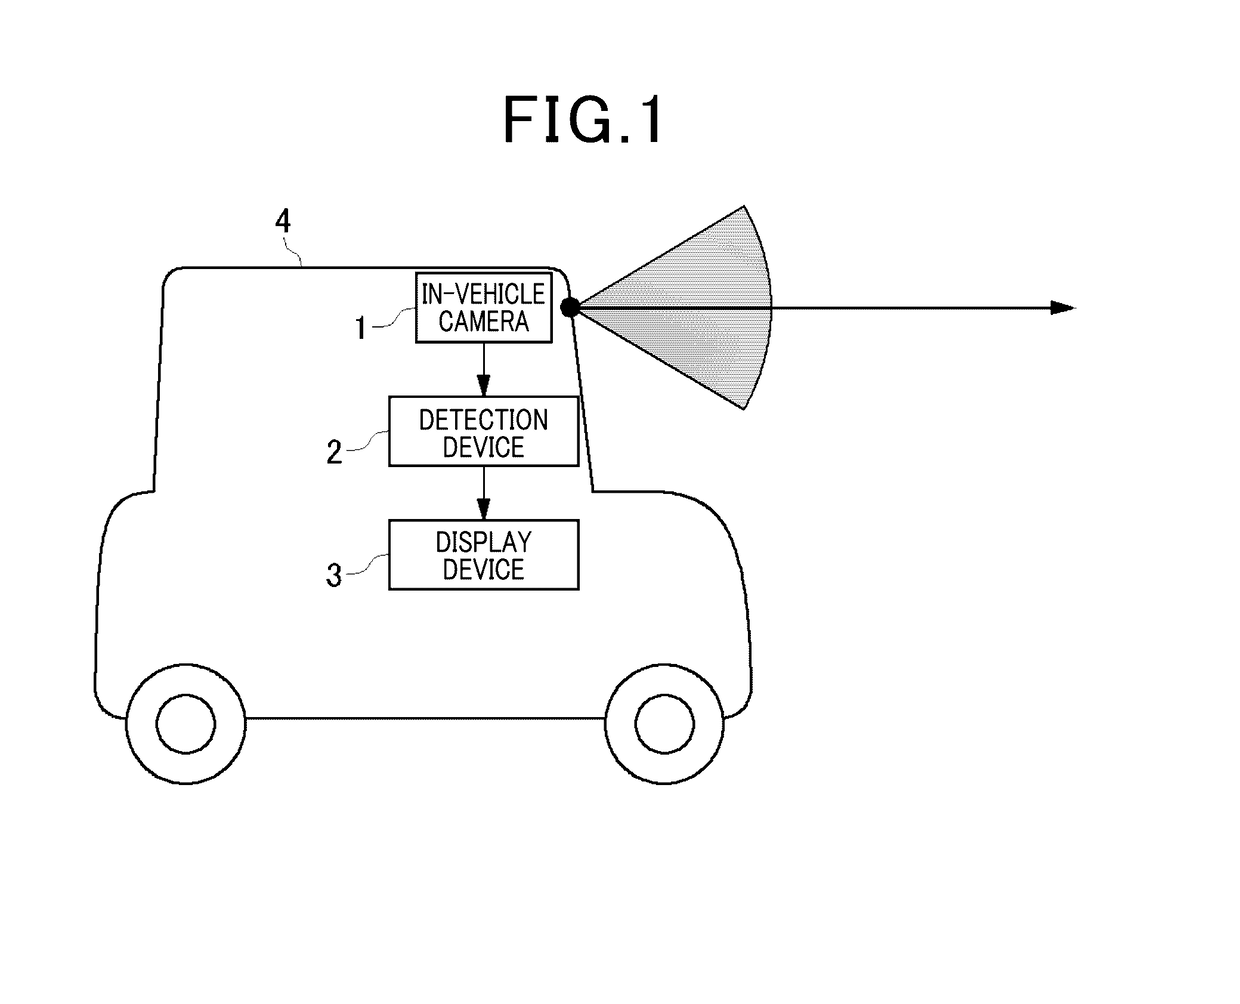 Detection device, detection program, detection method, vehicle equipped with detection device, parameter calculation device, parameter calculating parameters, parameter calculation program, and method of calculating parameters